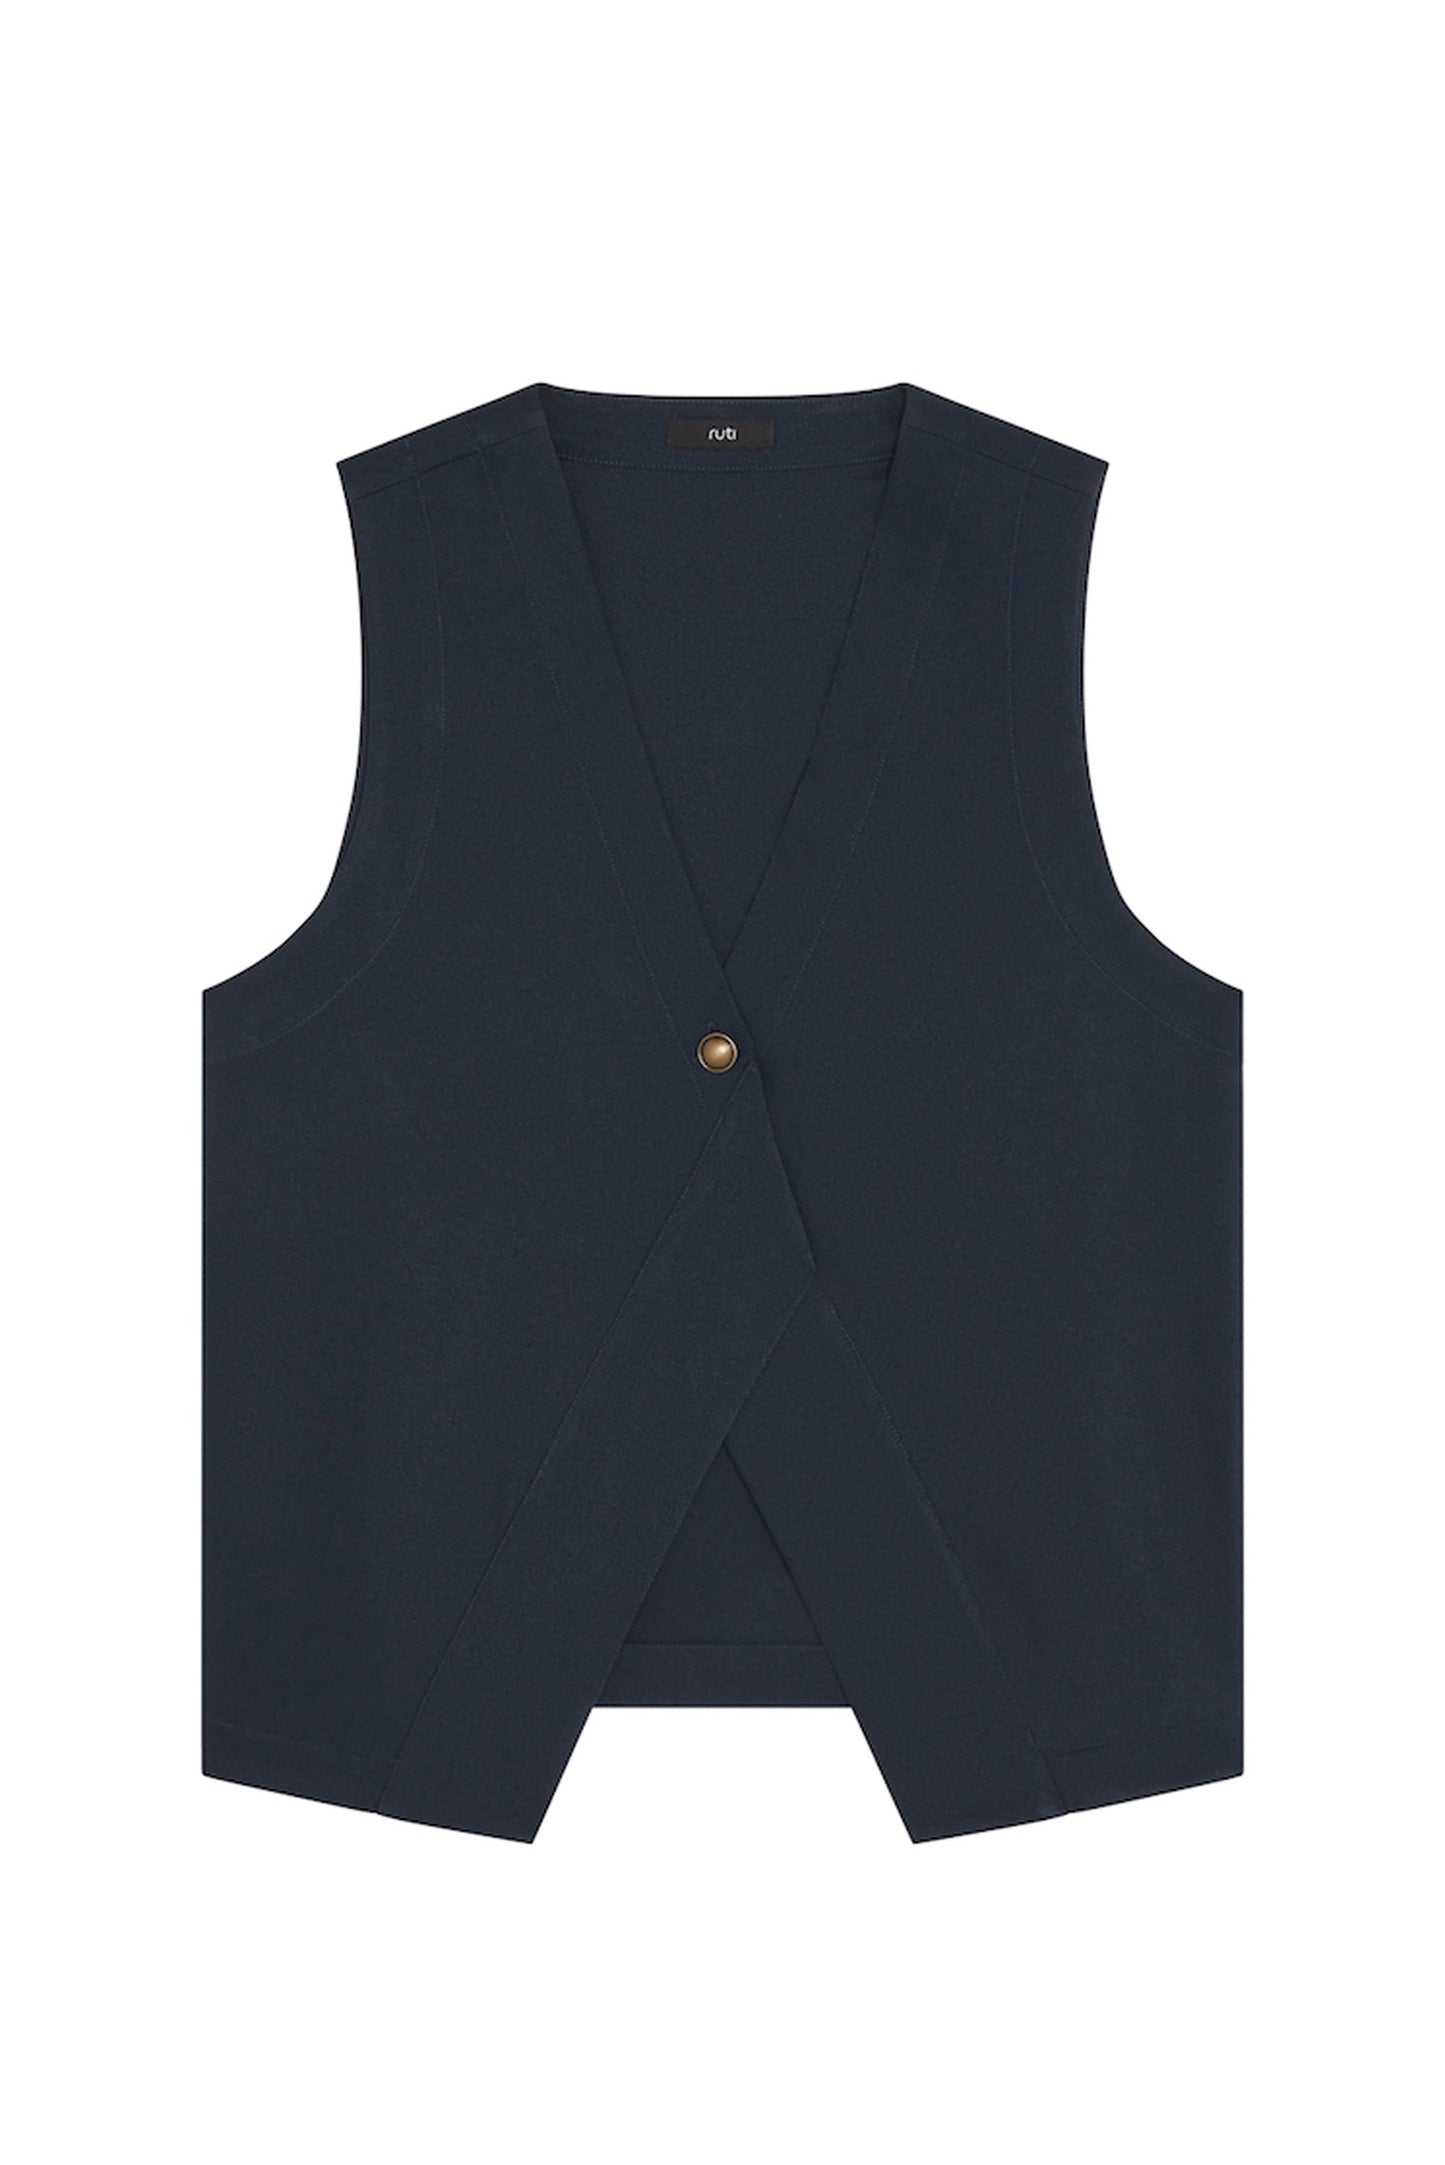 In Command Tailored Vest